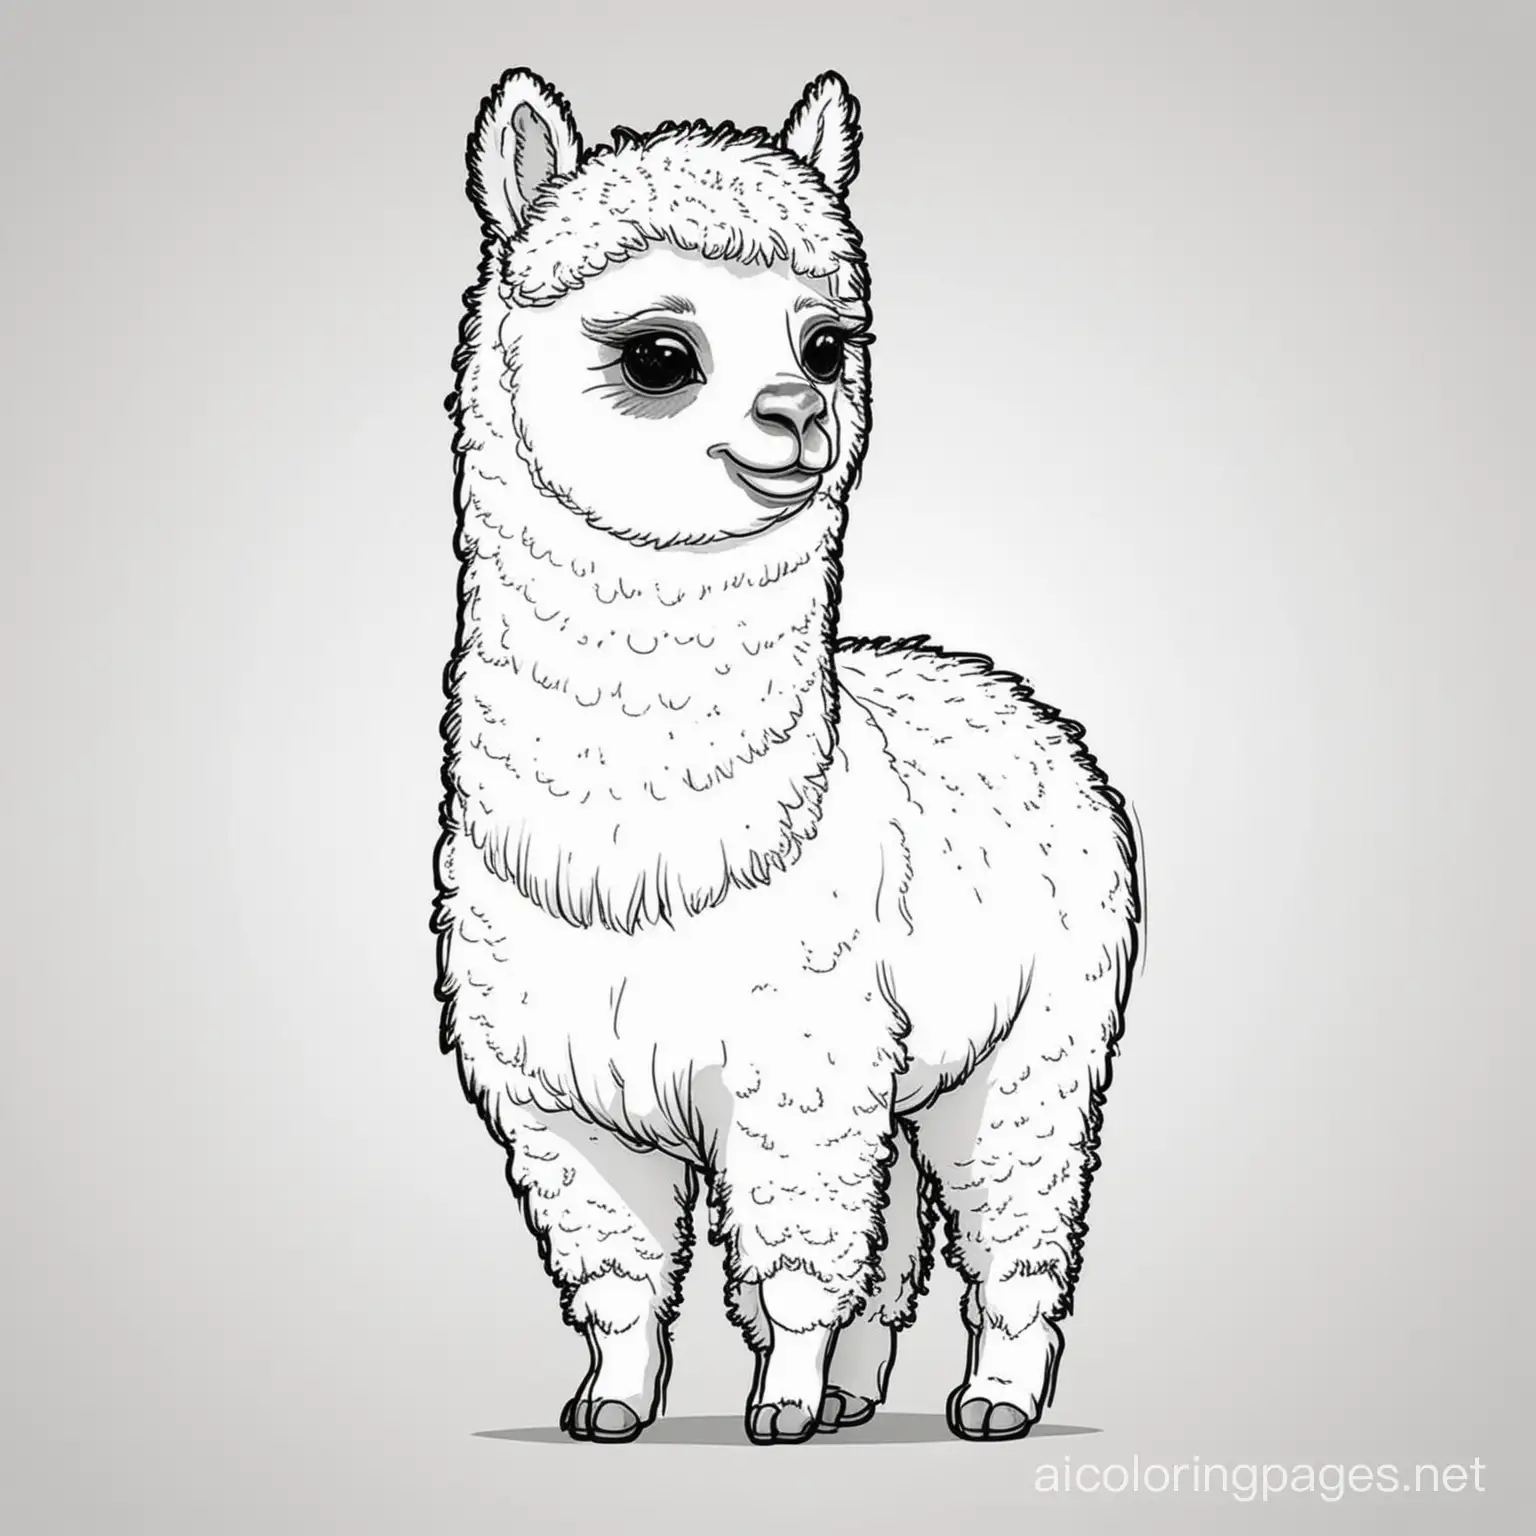 alpaca line only

,
 Coloring Page, black and white, line art, white background, Simplicity, Ample White Space. The background of the coloring page is plain white to make it easy for young children to color within the lines. The outlines of all the subjects are easy to distinguish, making it simple for kids to color without too much difficulty